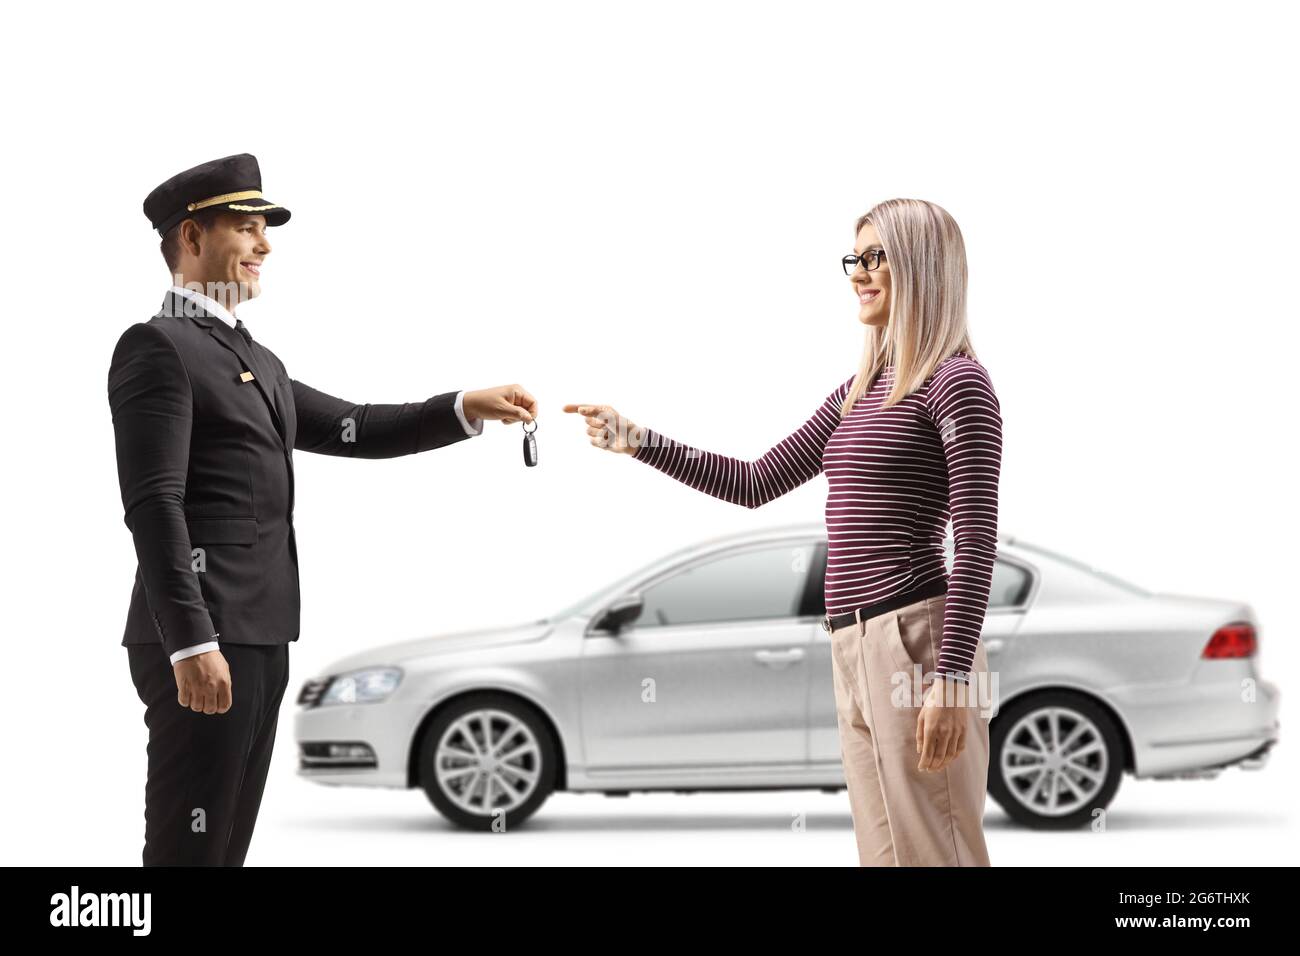 Woman giving car keys from a silver car to a chauffeur isolated on white background Stock Photo